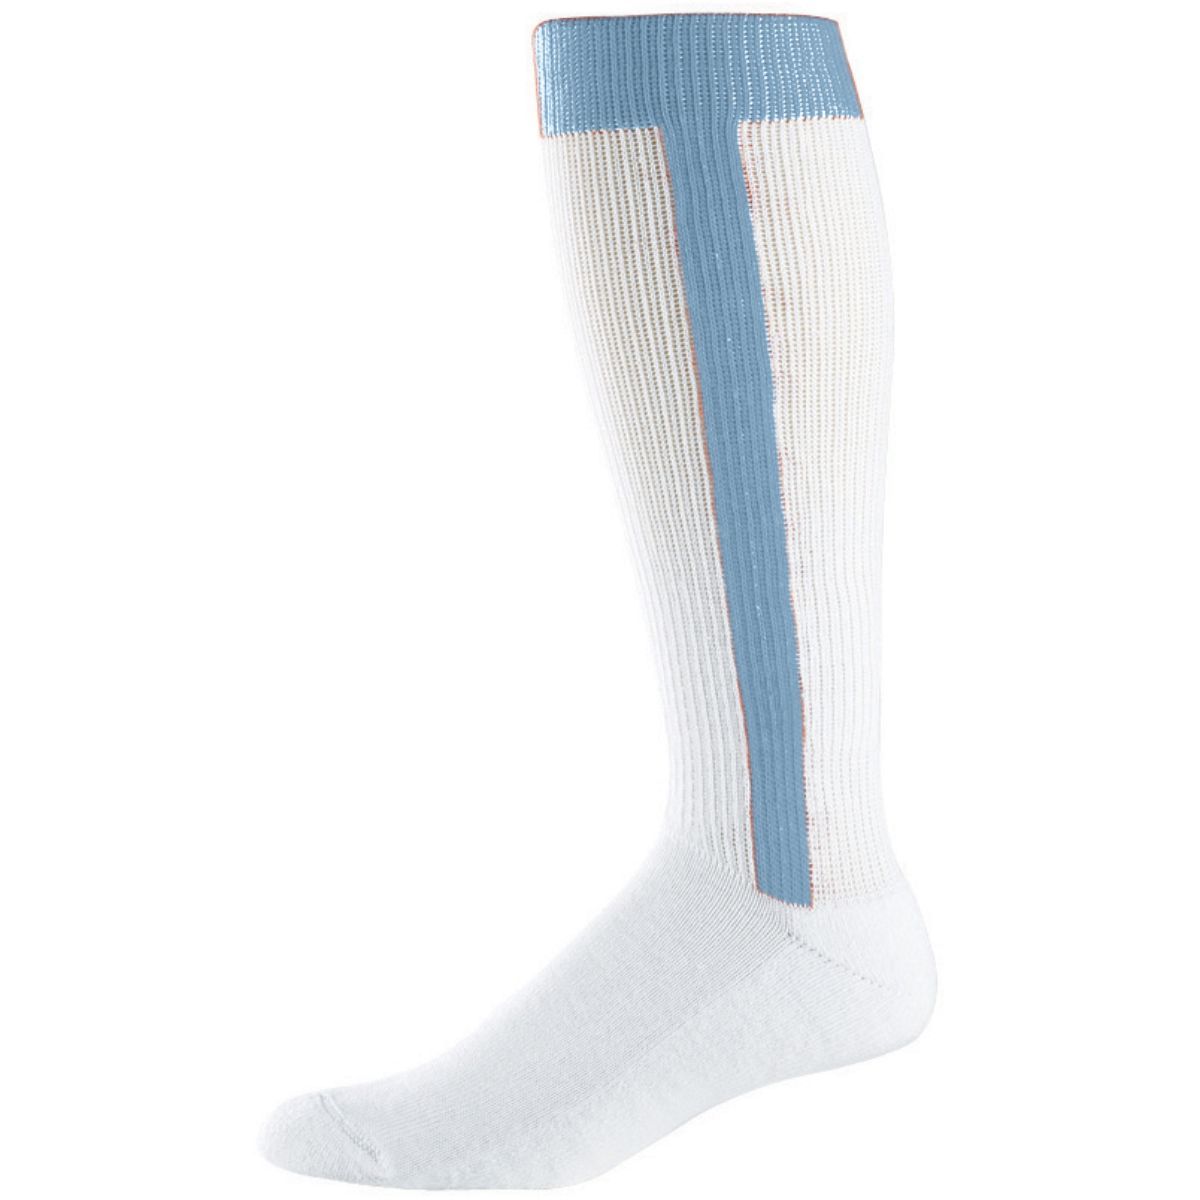 Augusta Sportswear Baseball Stirrup Sock in Light Blue  -Part of the Accessories, Augusta-Products, Accessories-Socks, Baseball, All-Sports, All-Sports-1 product lines at KanaleyCreations.com